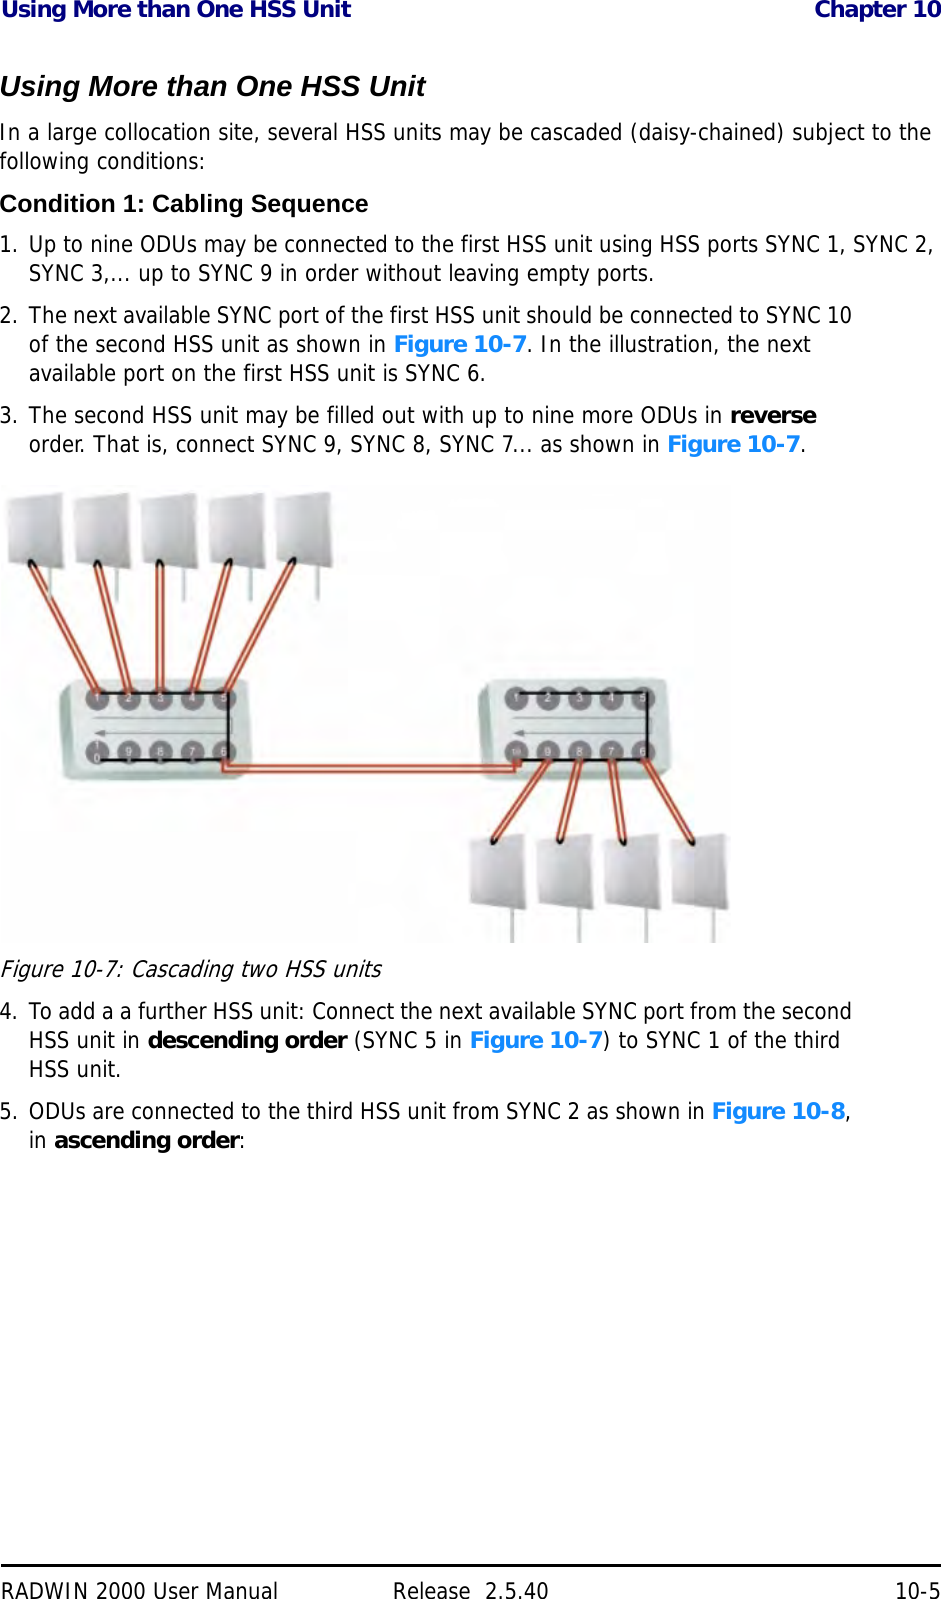 Using More than One HSS Unit Chapter 10RADWIN 2000 User Manual Release  2.5.40 10-5Using More than One HSS UnitIn a large collocation site, several HSS units may be cascaded (daisy-chained) subject to the following conditions:Condition 1: Cabling Sequence1. Up to nine ODUs may be connected to the first HSS unit using HSS ports SYNC 1, SYNC 2, SYNC 3,... up to SYNC 9 in order without leaving empty ports.2. The next available SYNC port of the first HSS unit should be connected to SYNC 10 of the second HSS unit as shown in Figure 10-7. In the illustration, the next available port on the first HSS unit is SYNC 6.3. The second HSS unit may be filled out with up to nine more ODUs in reverse order. That is, connect SYNC 9, SYNC 8, SYNC 7... as shown in Figure 10-7.Figure 10-7: Cascading two HSS units4. To add a a further HSS unit: Connect the next available SYNC port from the second HSS unit in descending order (SYNC 5 in Figure 10-7) to SYNC 1 of the third HSS unit.5. ODUs are connected to the third HSS unit from SYNC 2 as shown in Figure 10-8, in ascending order: